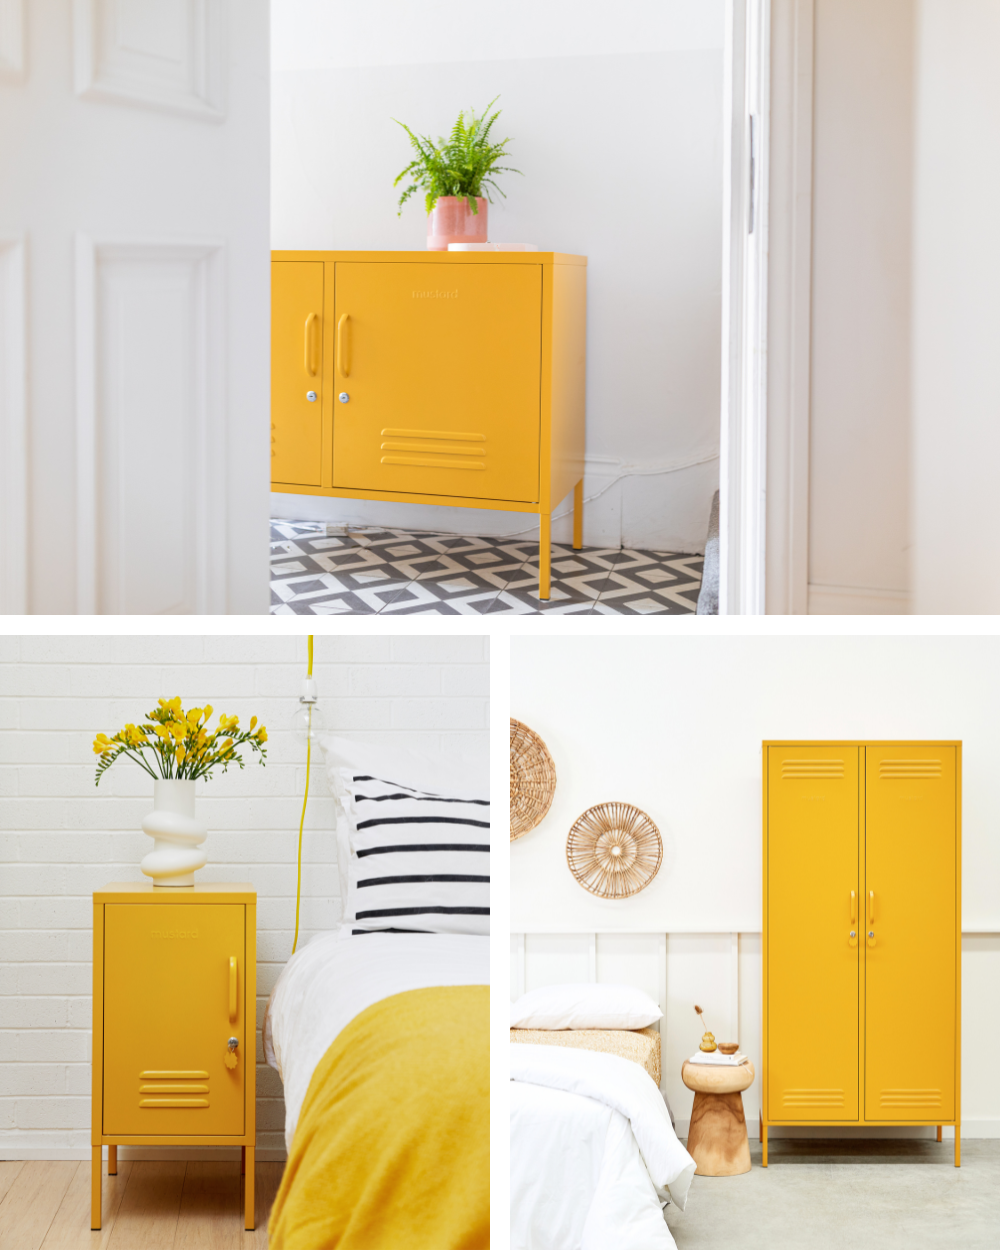 A collage of images shows Mustard lockers styled in bright, white spaces with neutral accents.